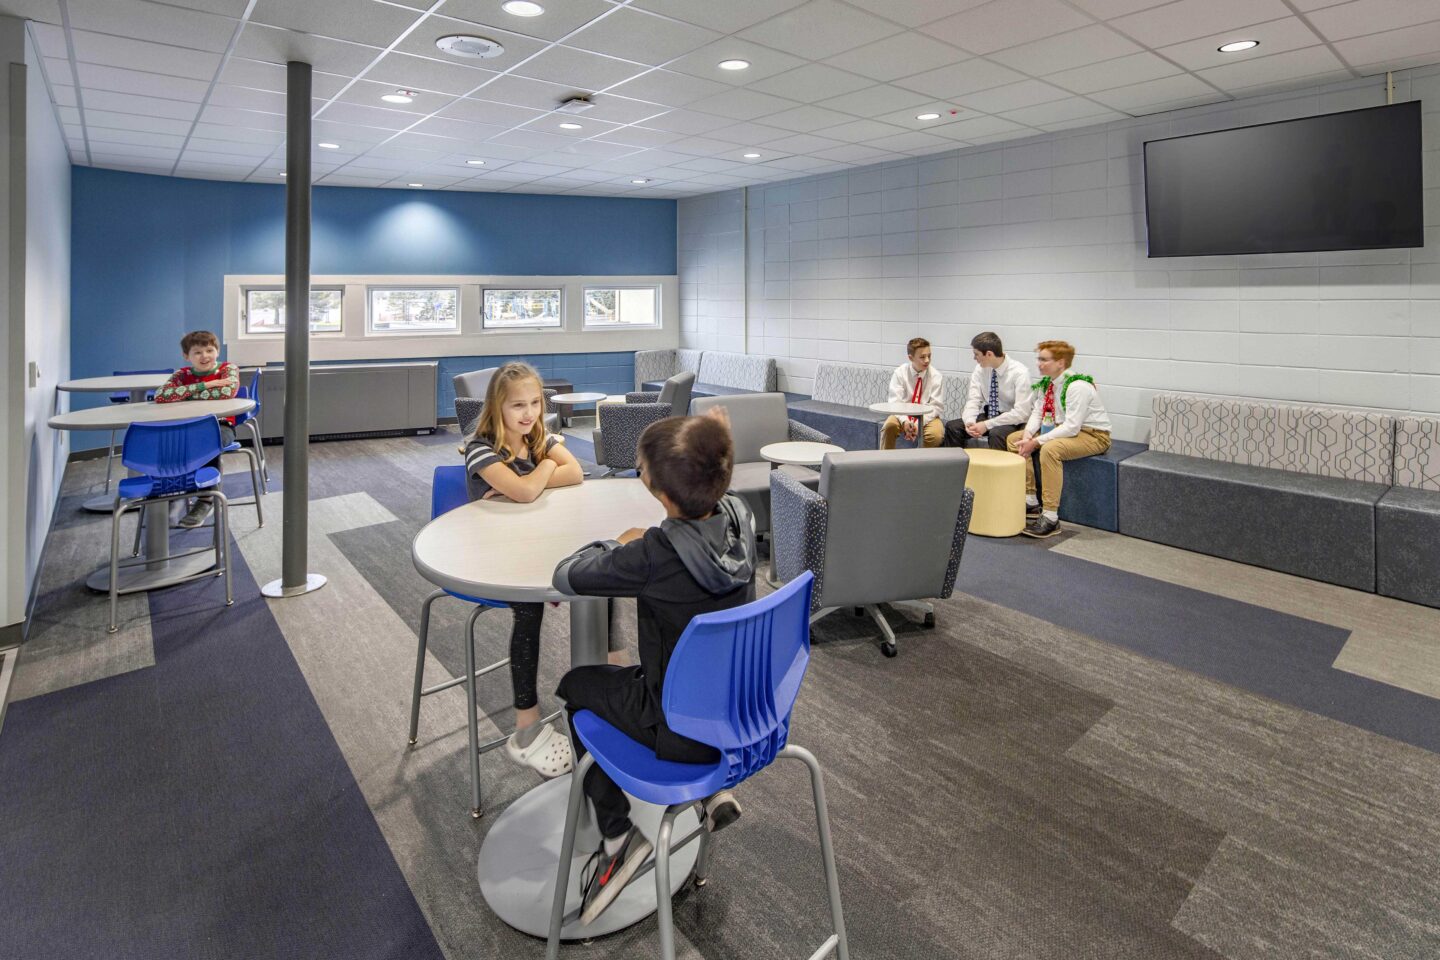 Students work and collaborate in a space filled with flexible furniture options at Wheatland Center School